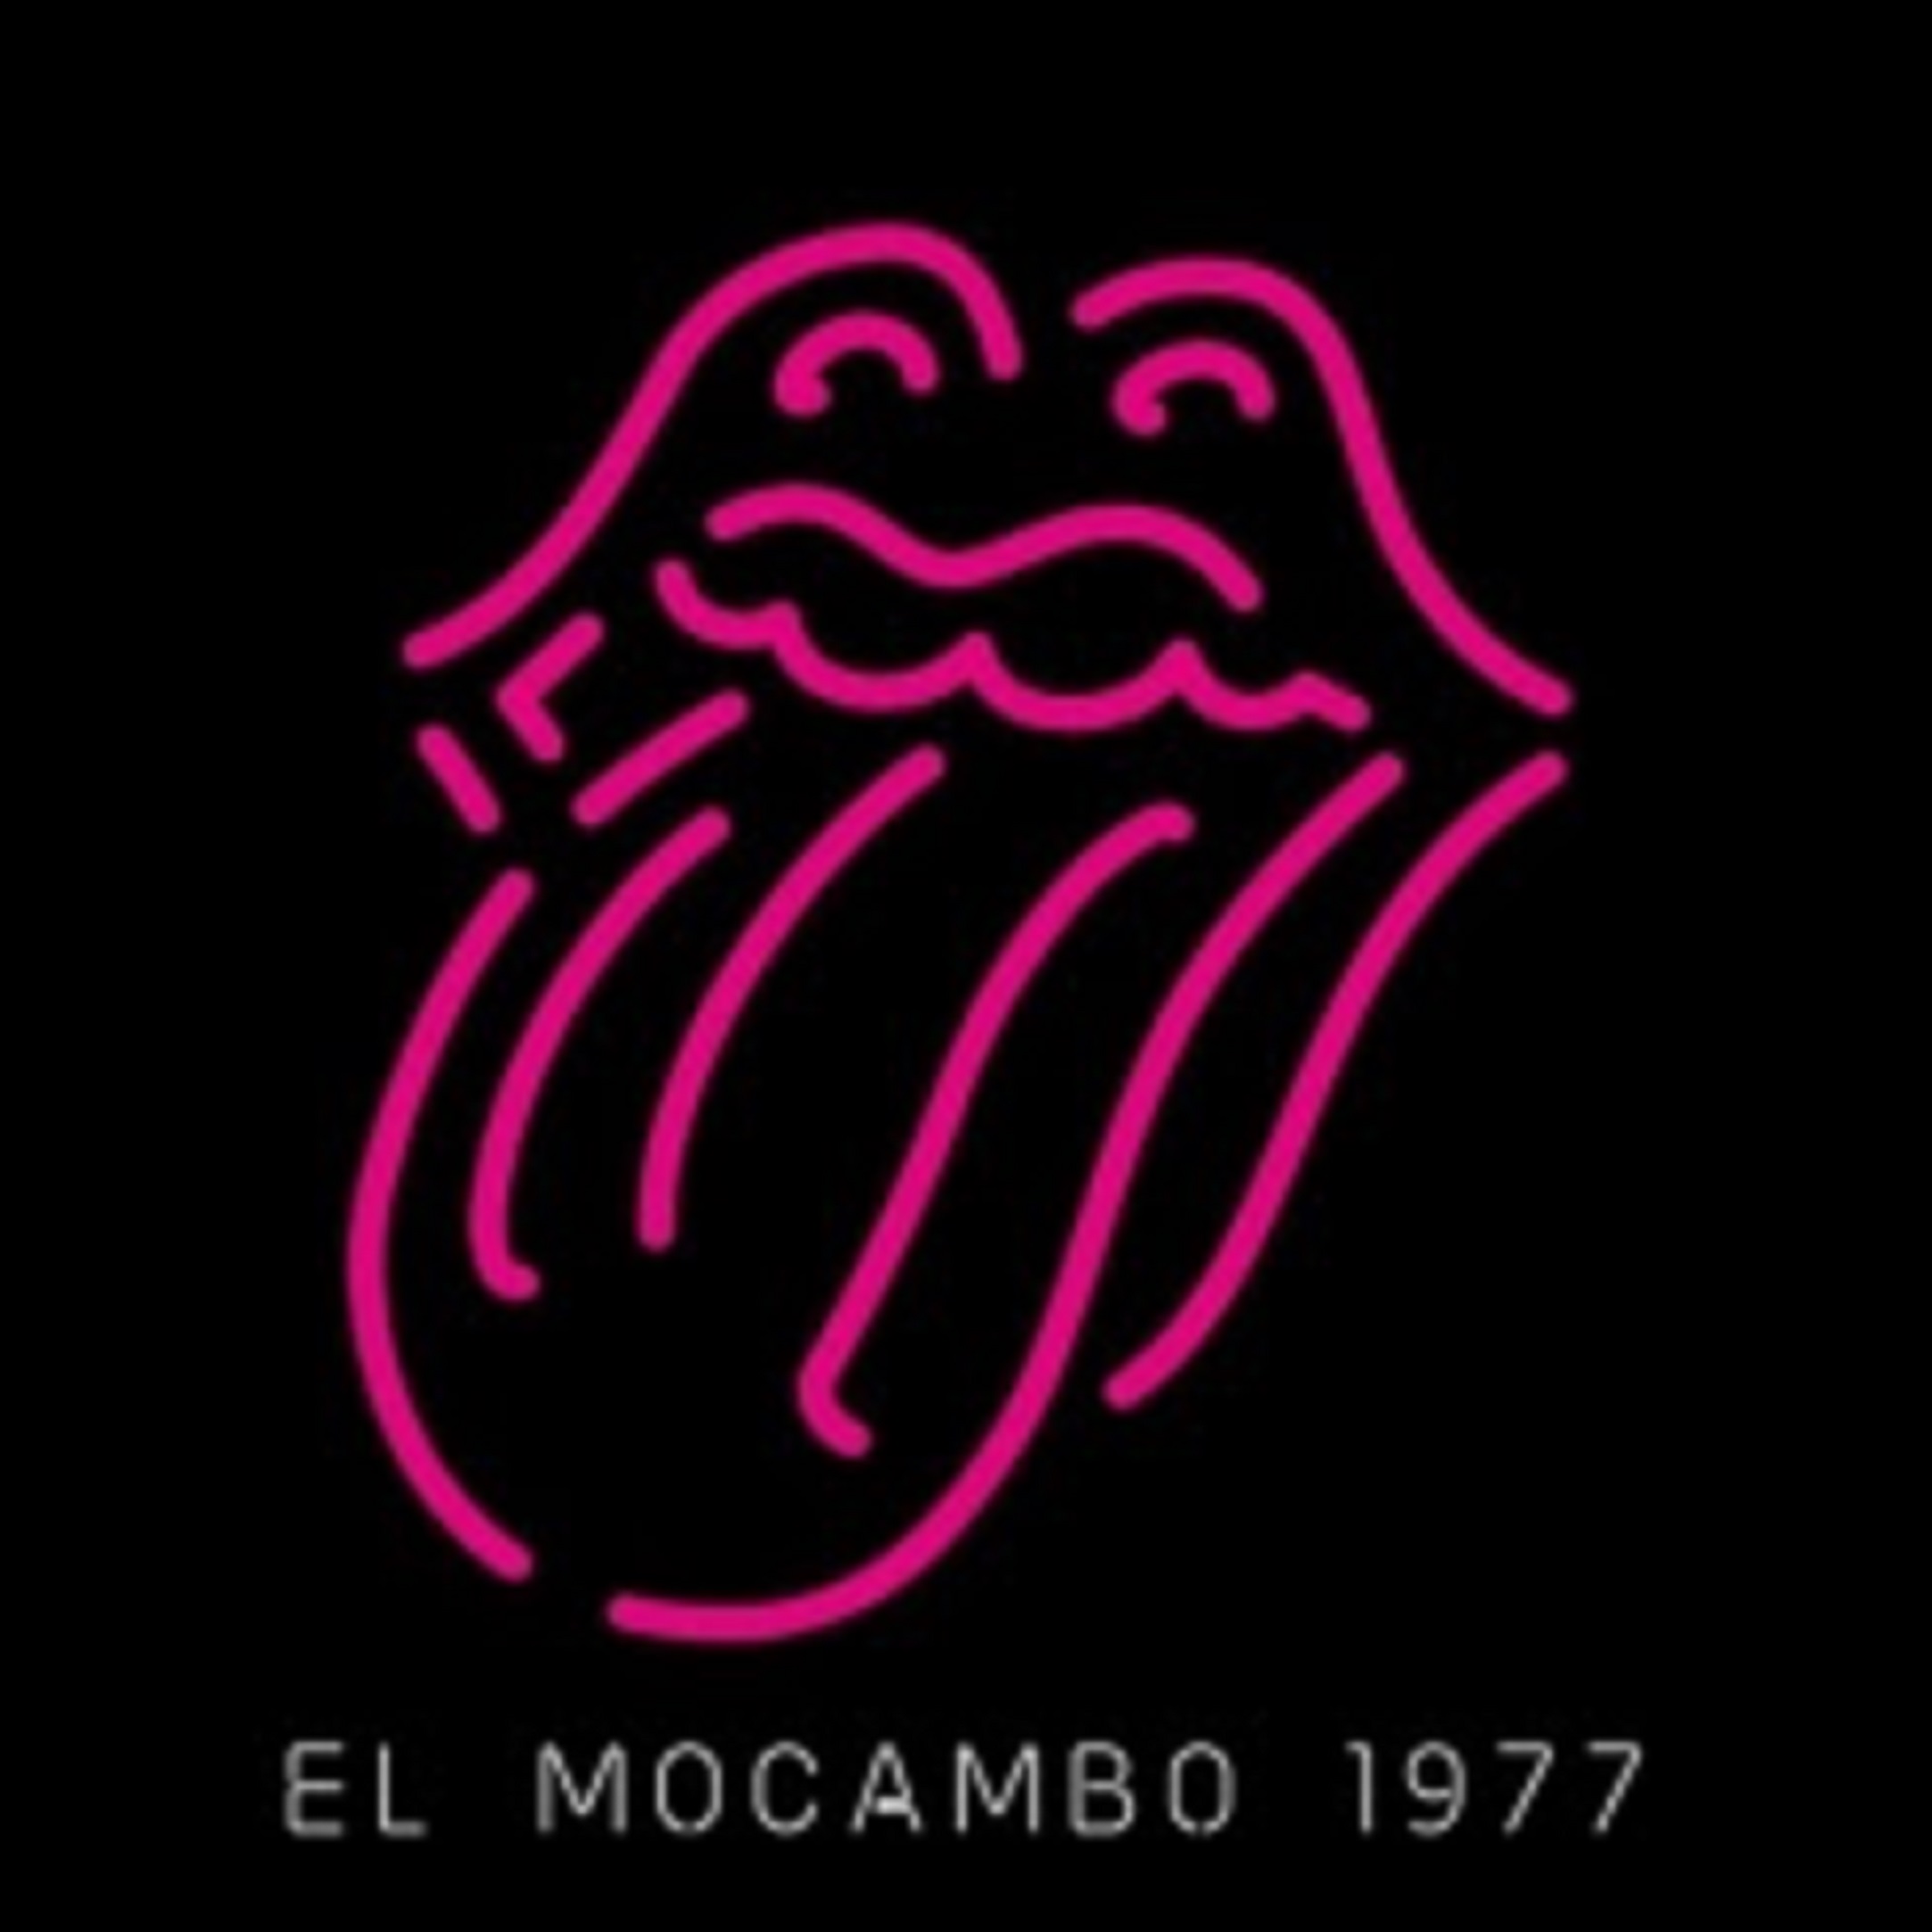 The Rolling Stones Announce ‘Live At The El Mocambo’ Album To Be Released On May 13